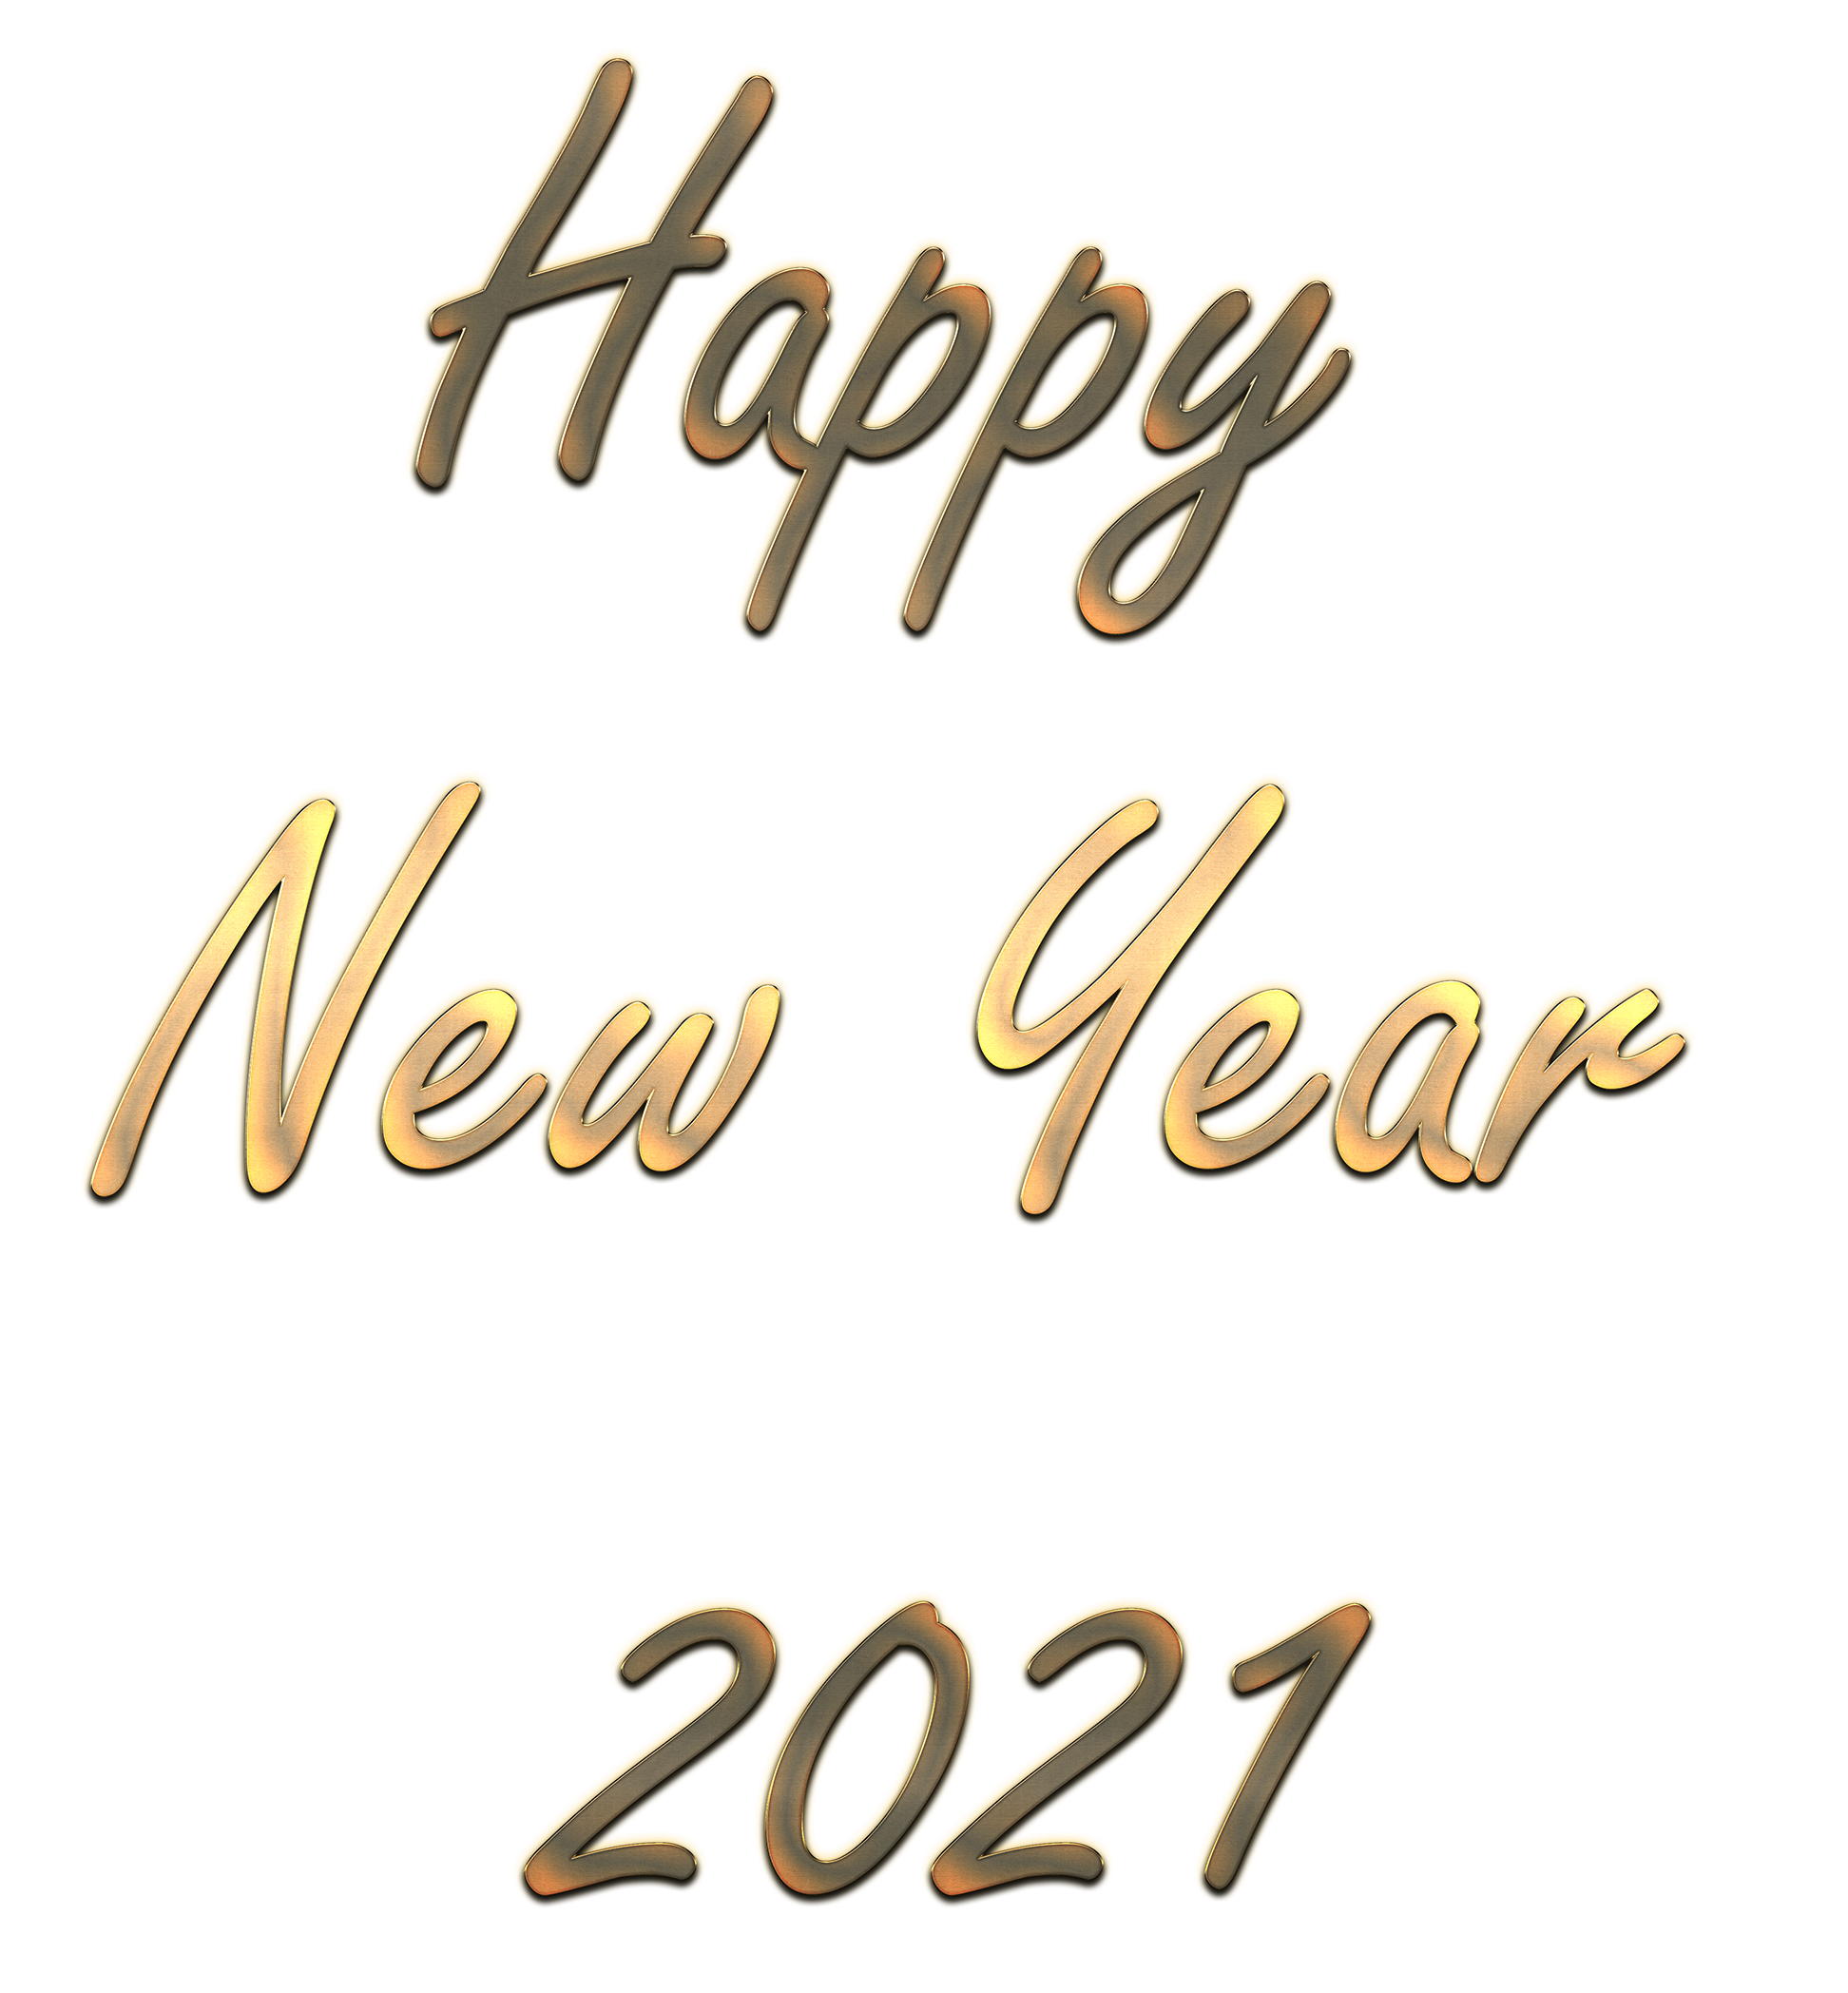 Happy New Year 2021 PNG Free Download